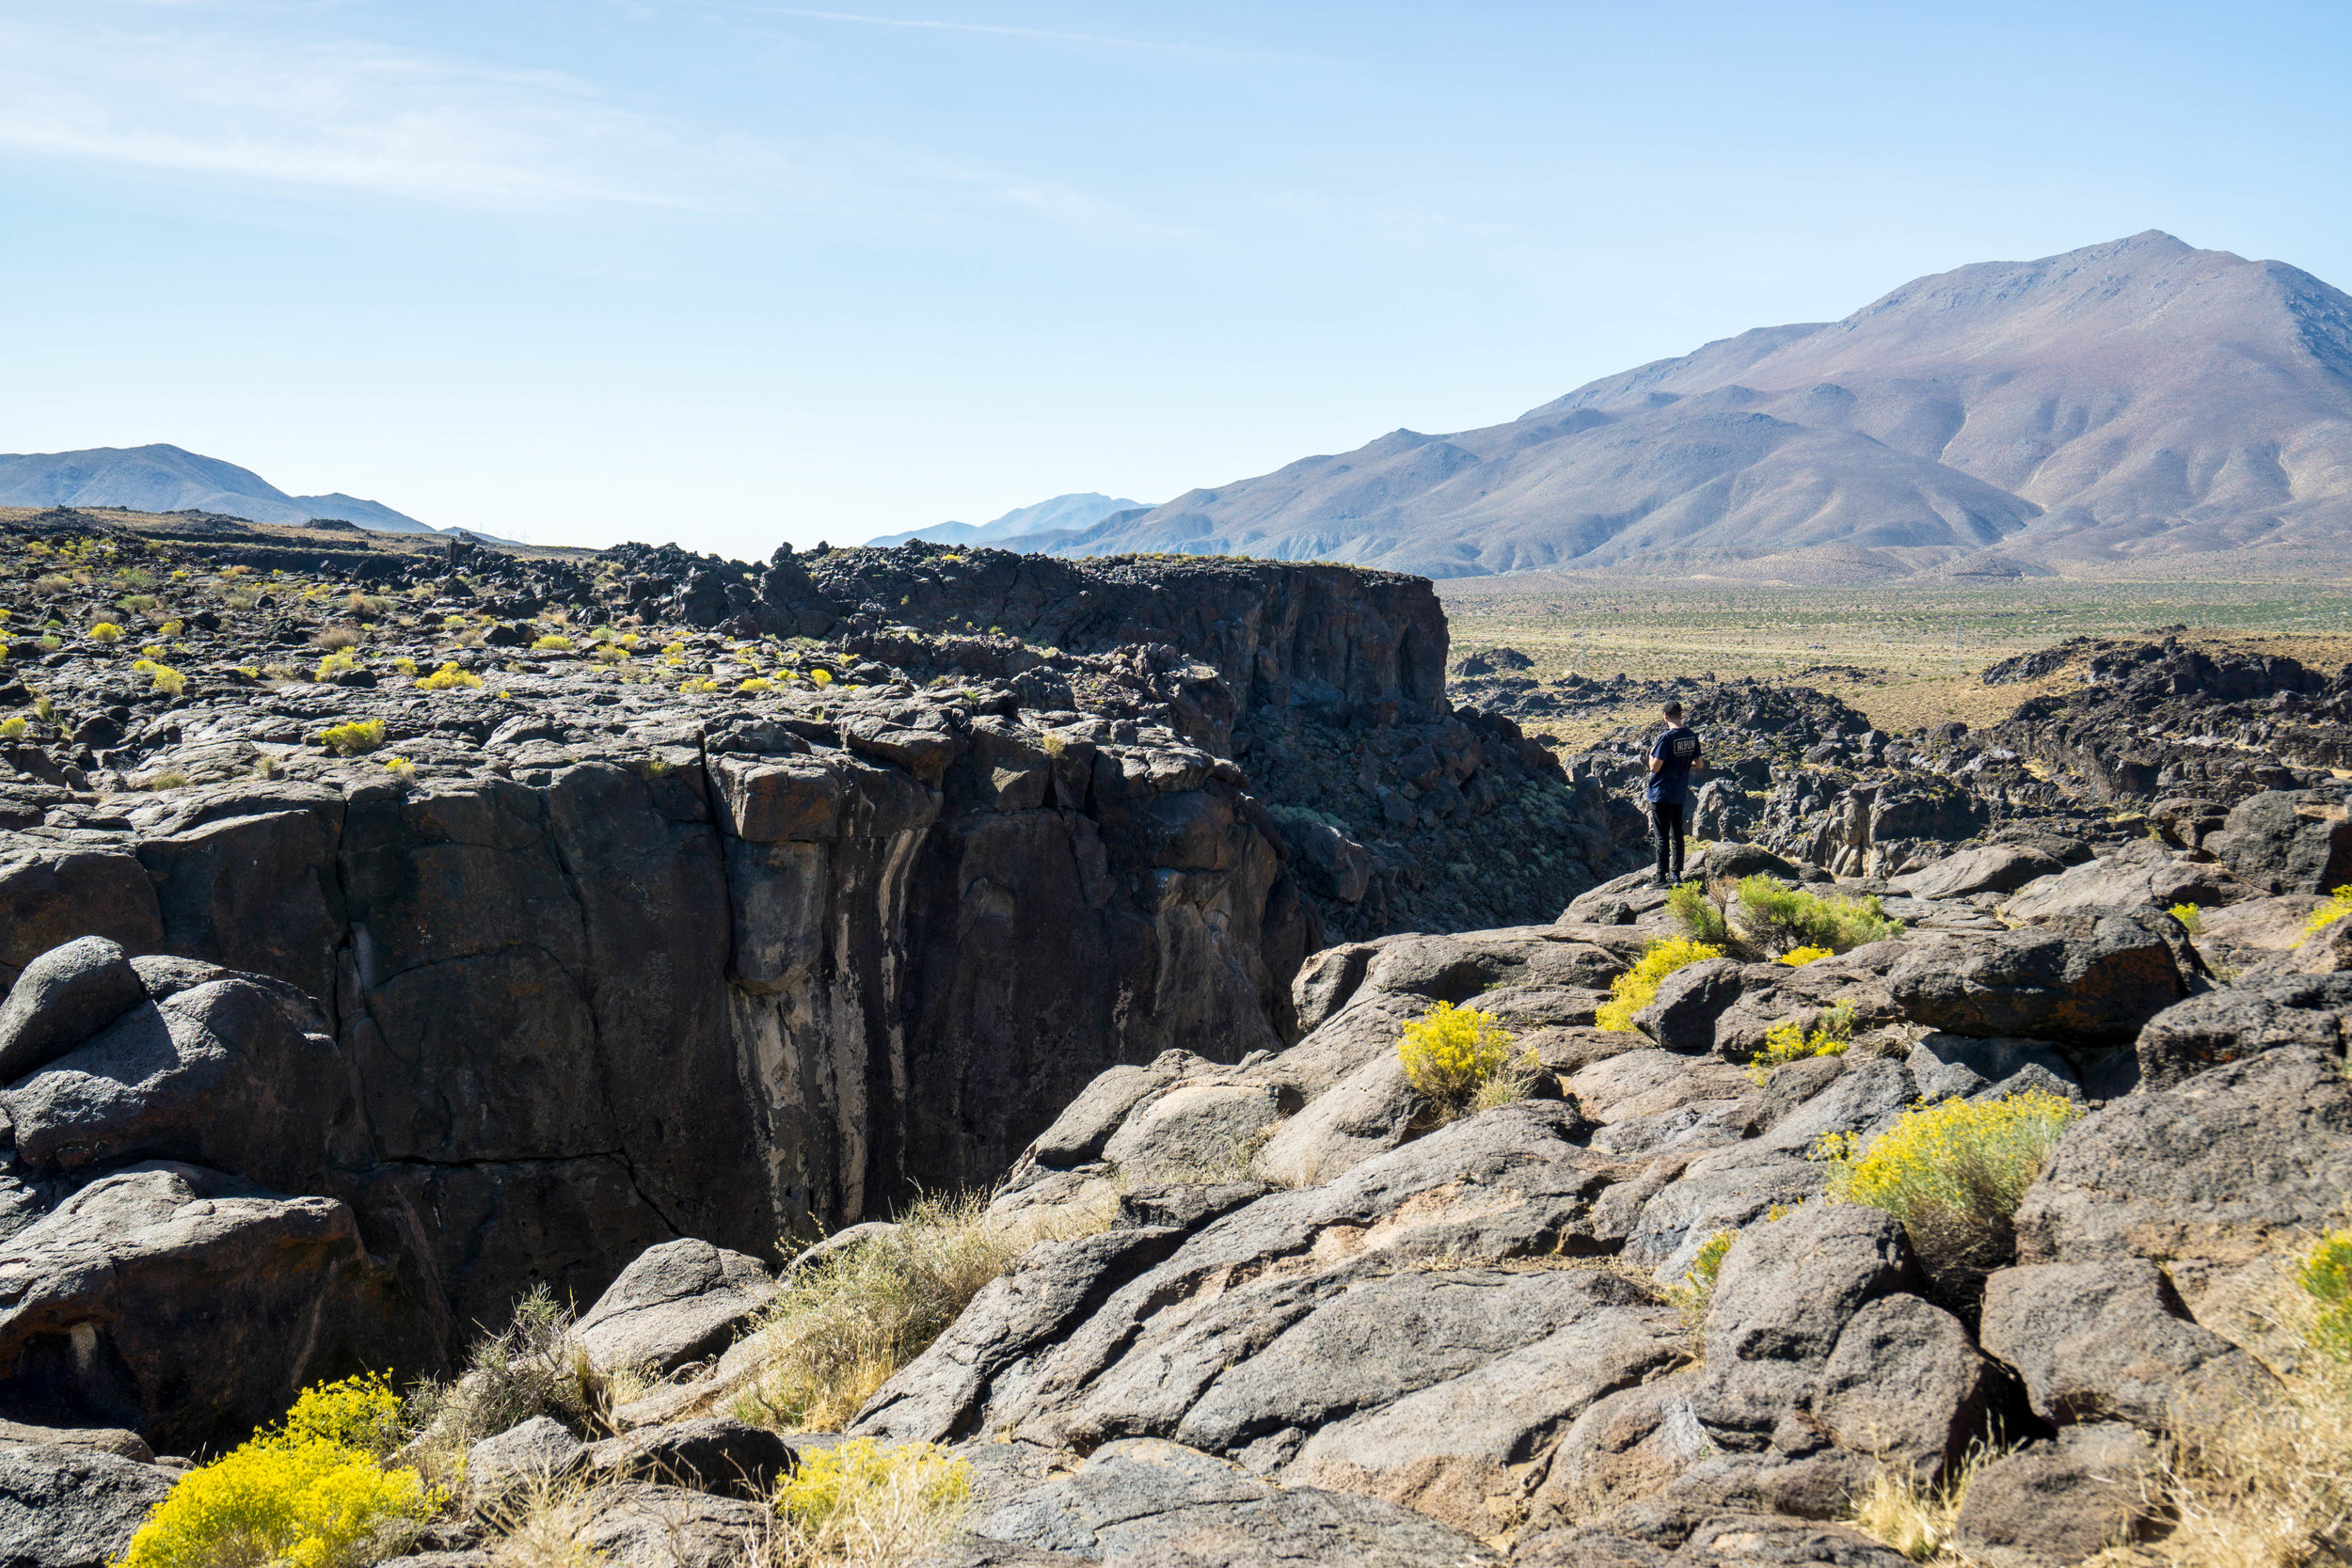 Nearby a water-carved lava canyon presents yet another reminder of the Sierra's volcanic past.